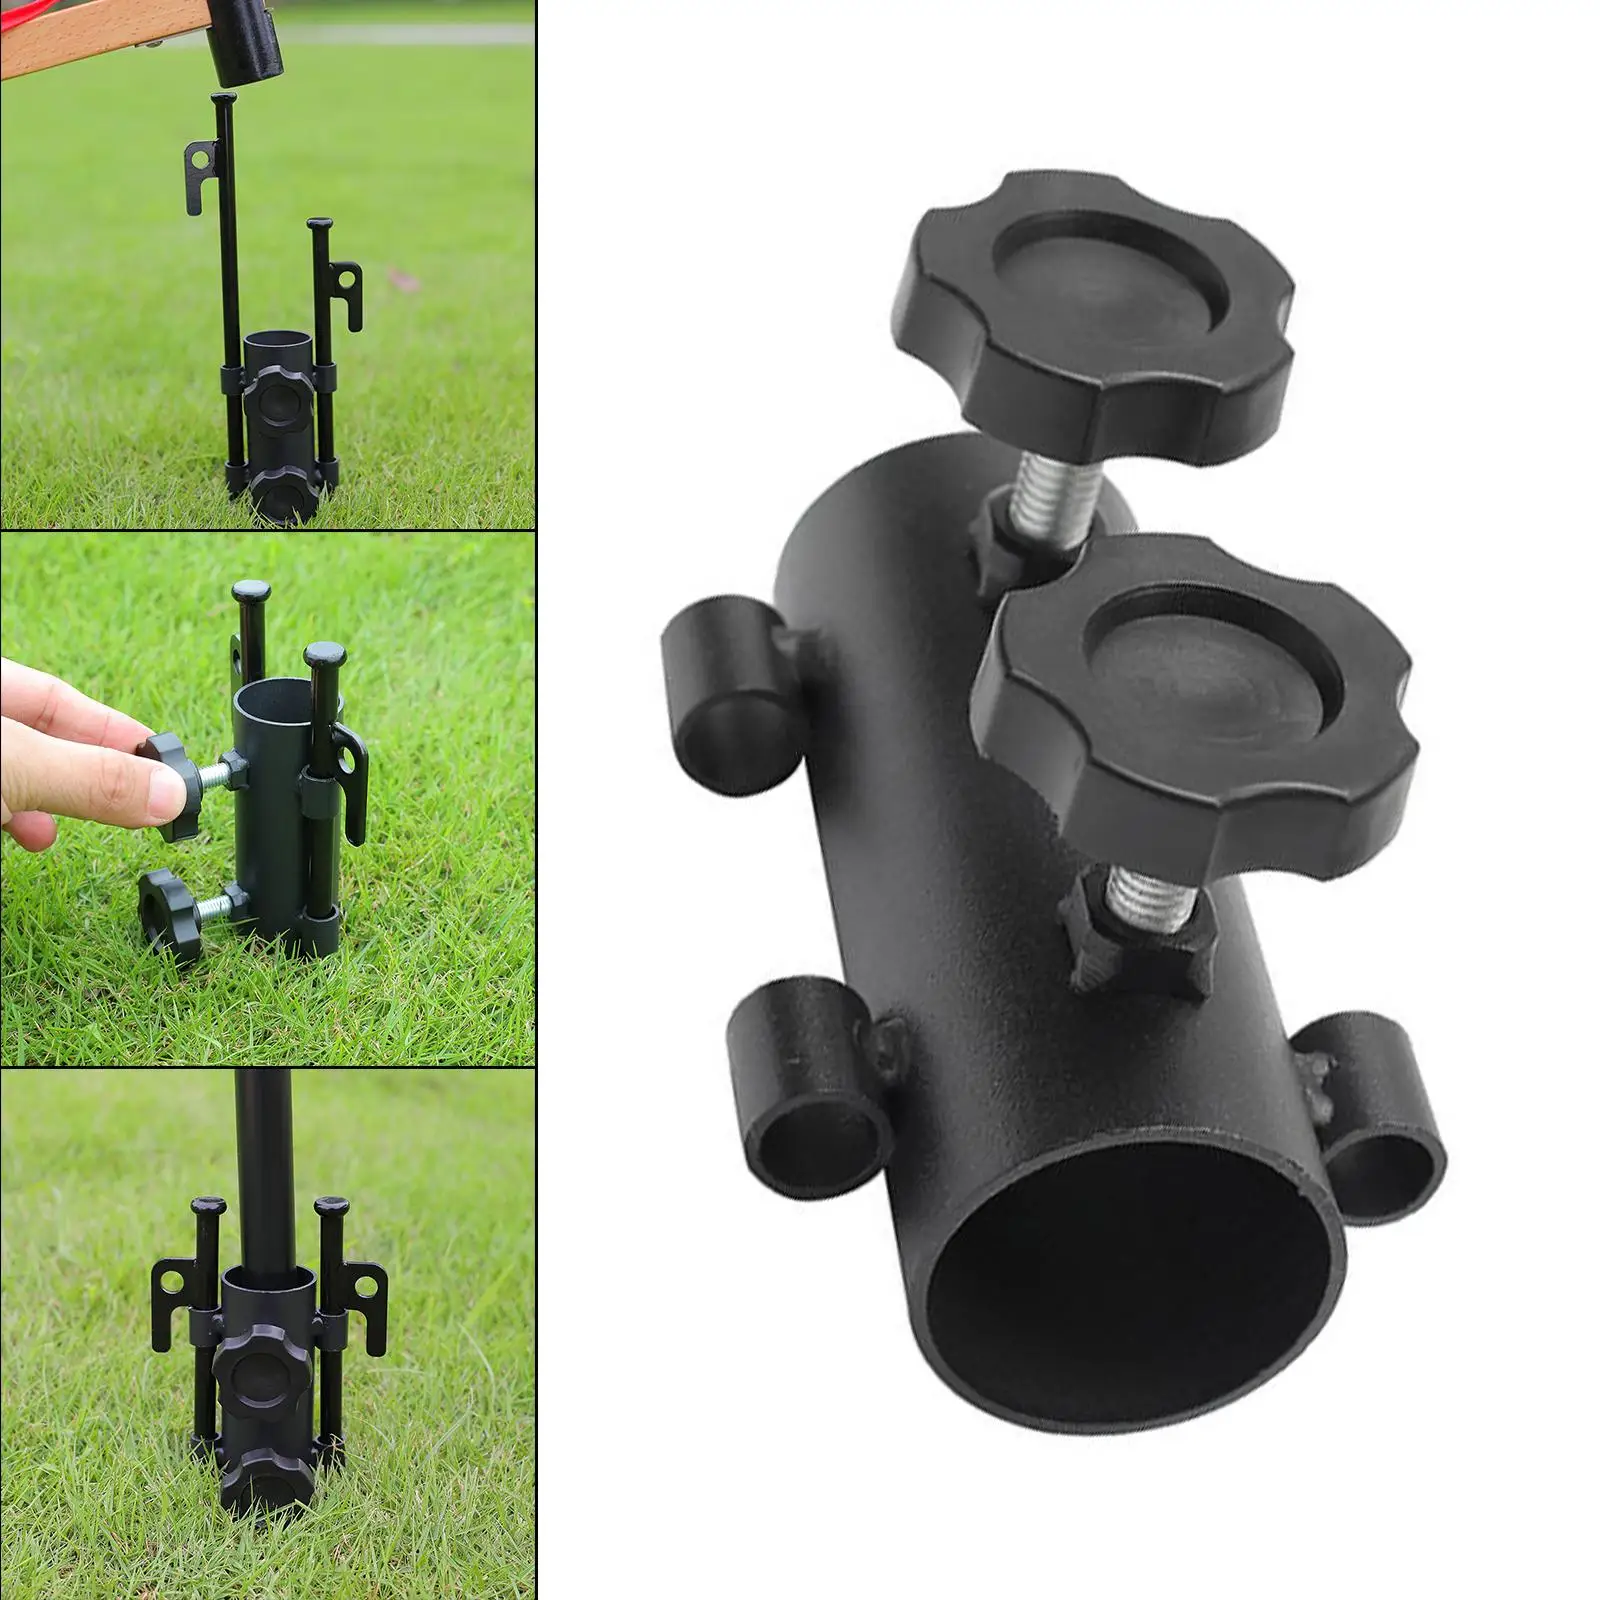 Portable Tent Rod Holder Fixed Tube Canopy Poles Stand for Outdoor Camping Traveling